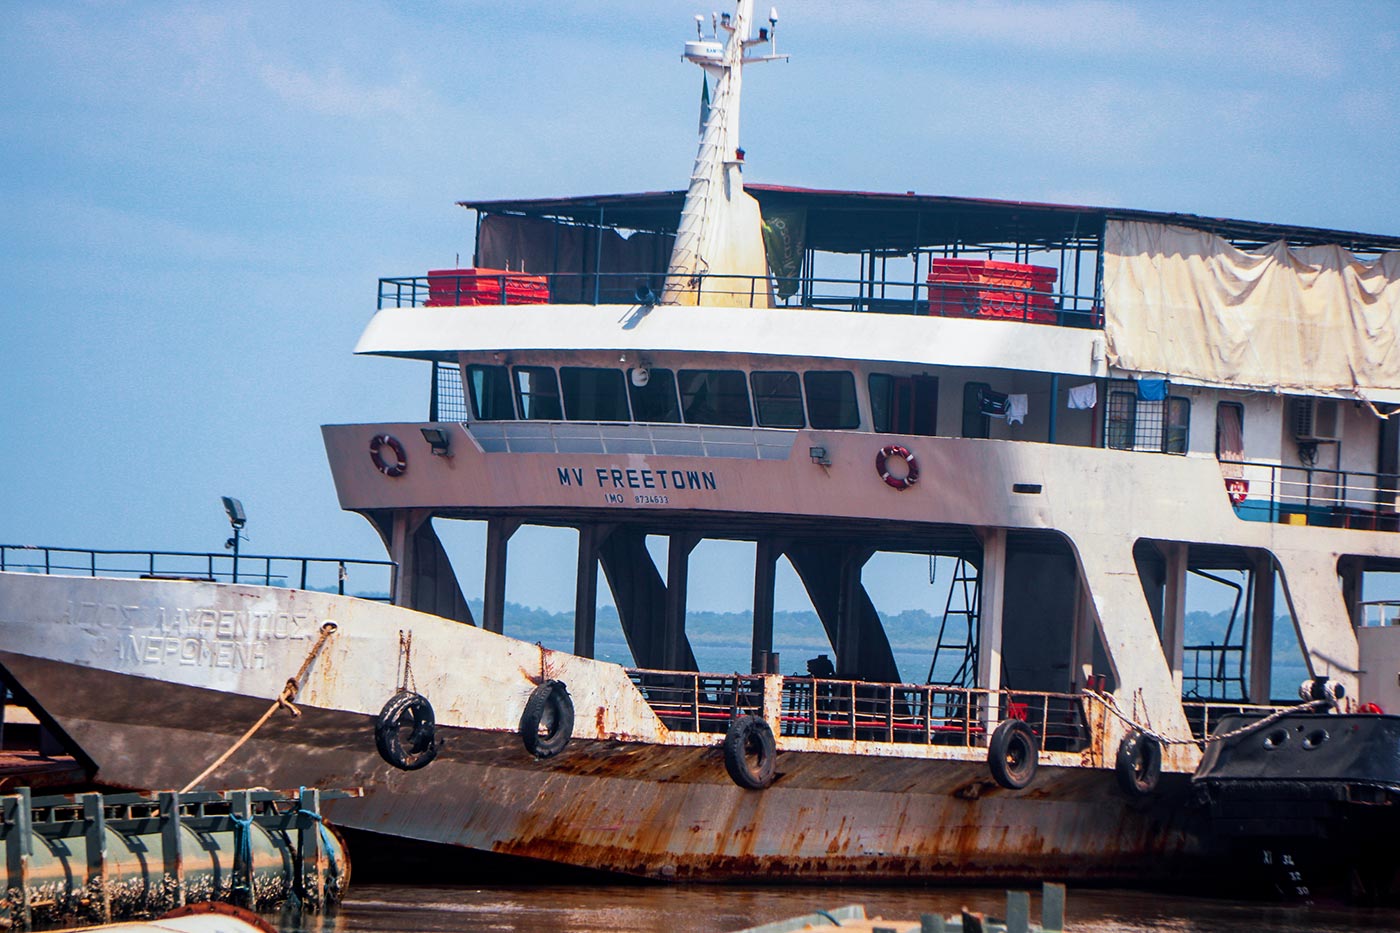 The MV Freetown showed signs of age and disrepair in 2022. (Credit: OCCRP)